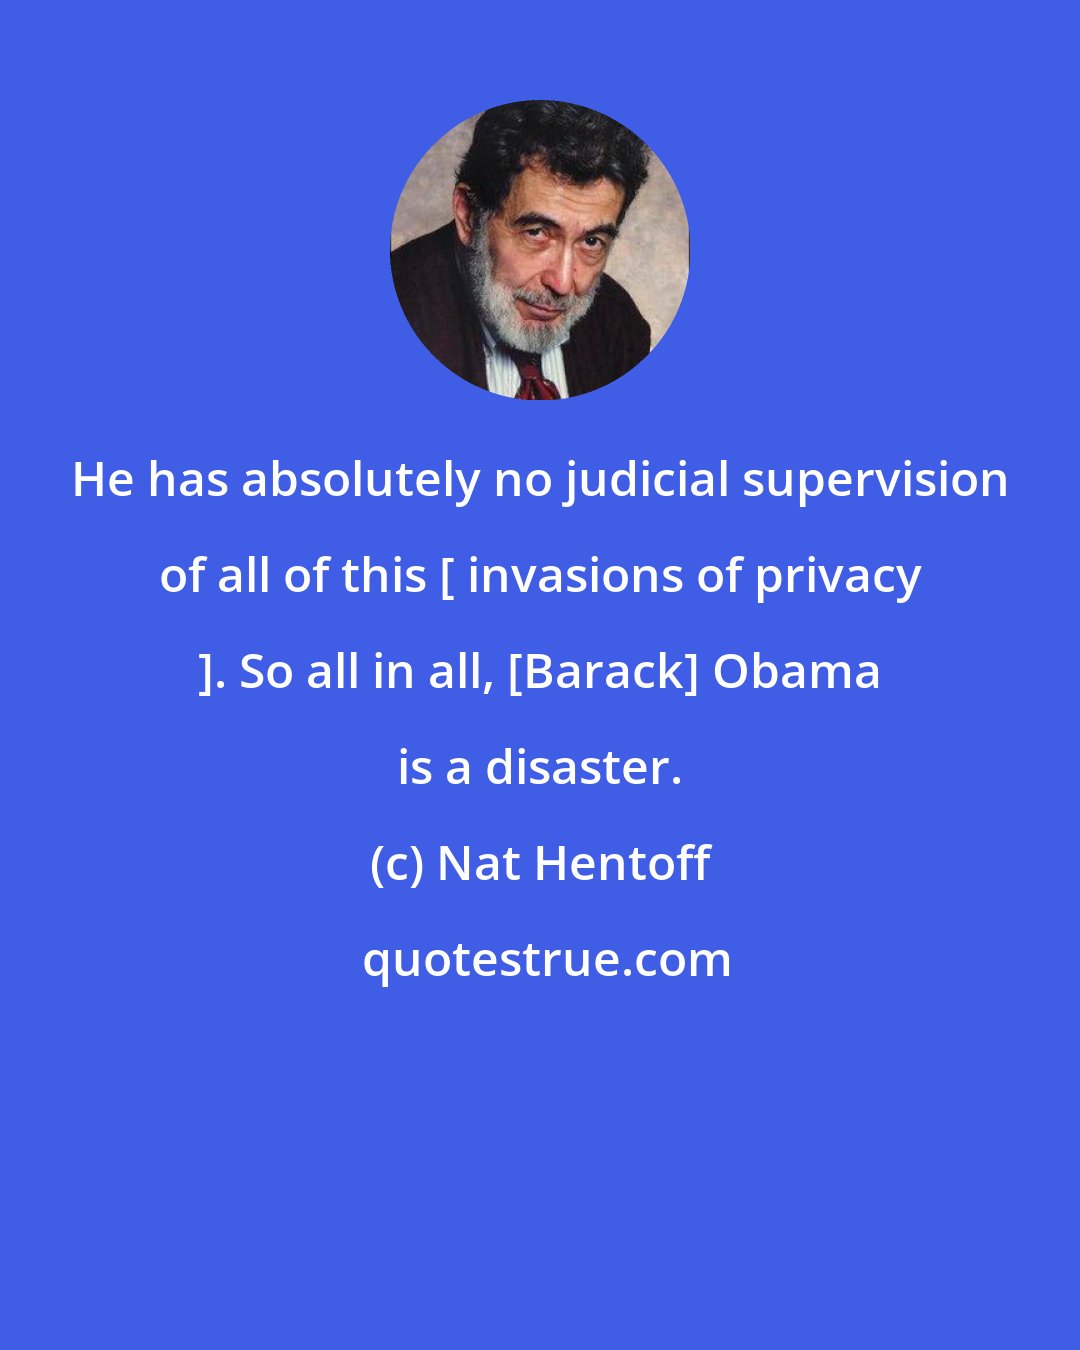 Nat Hentoff: He has absolutely no judicial supervision of all of this [ invasions of privacy ]. So all in all, [Barack] Obama is a disaster.